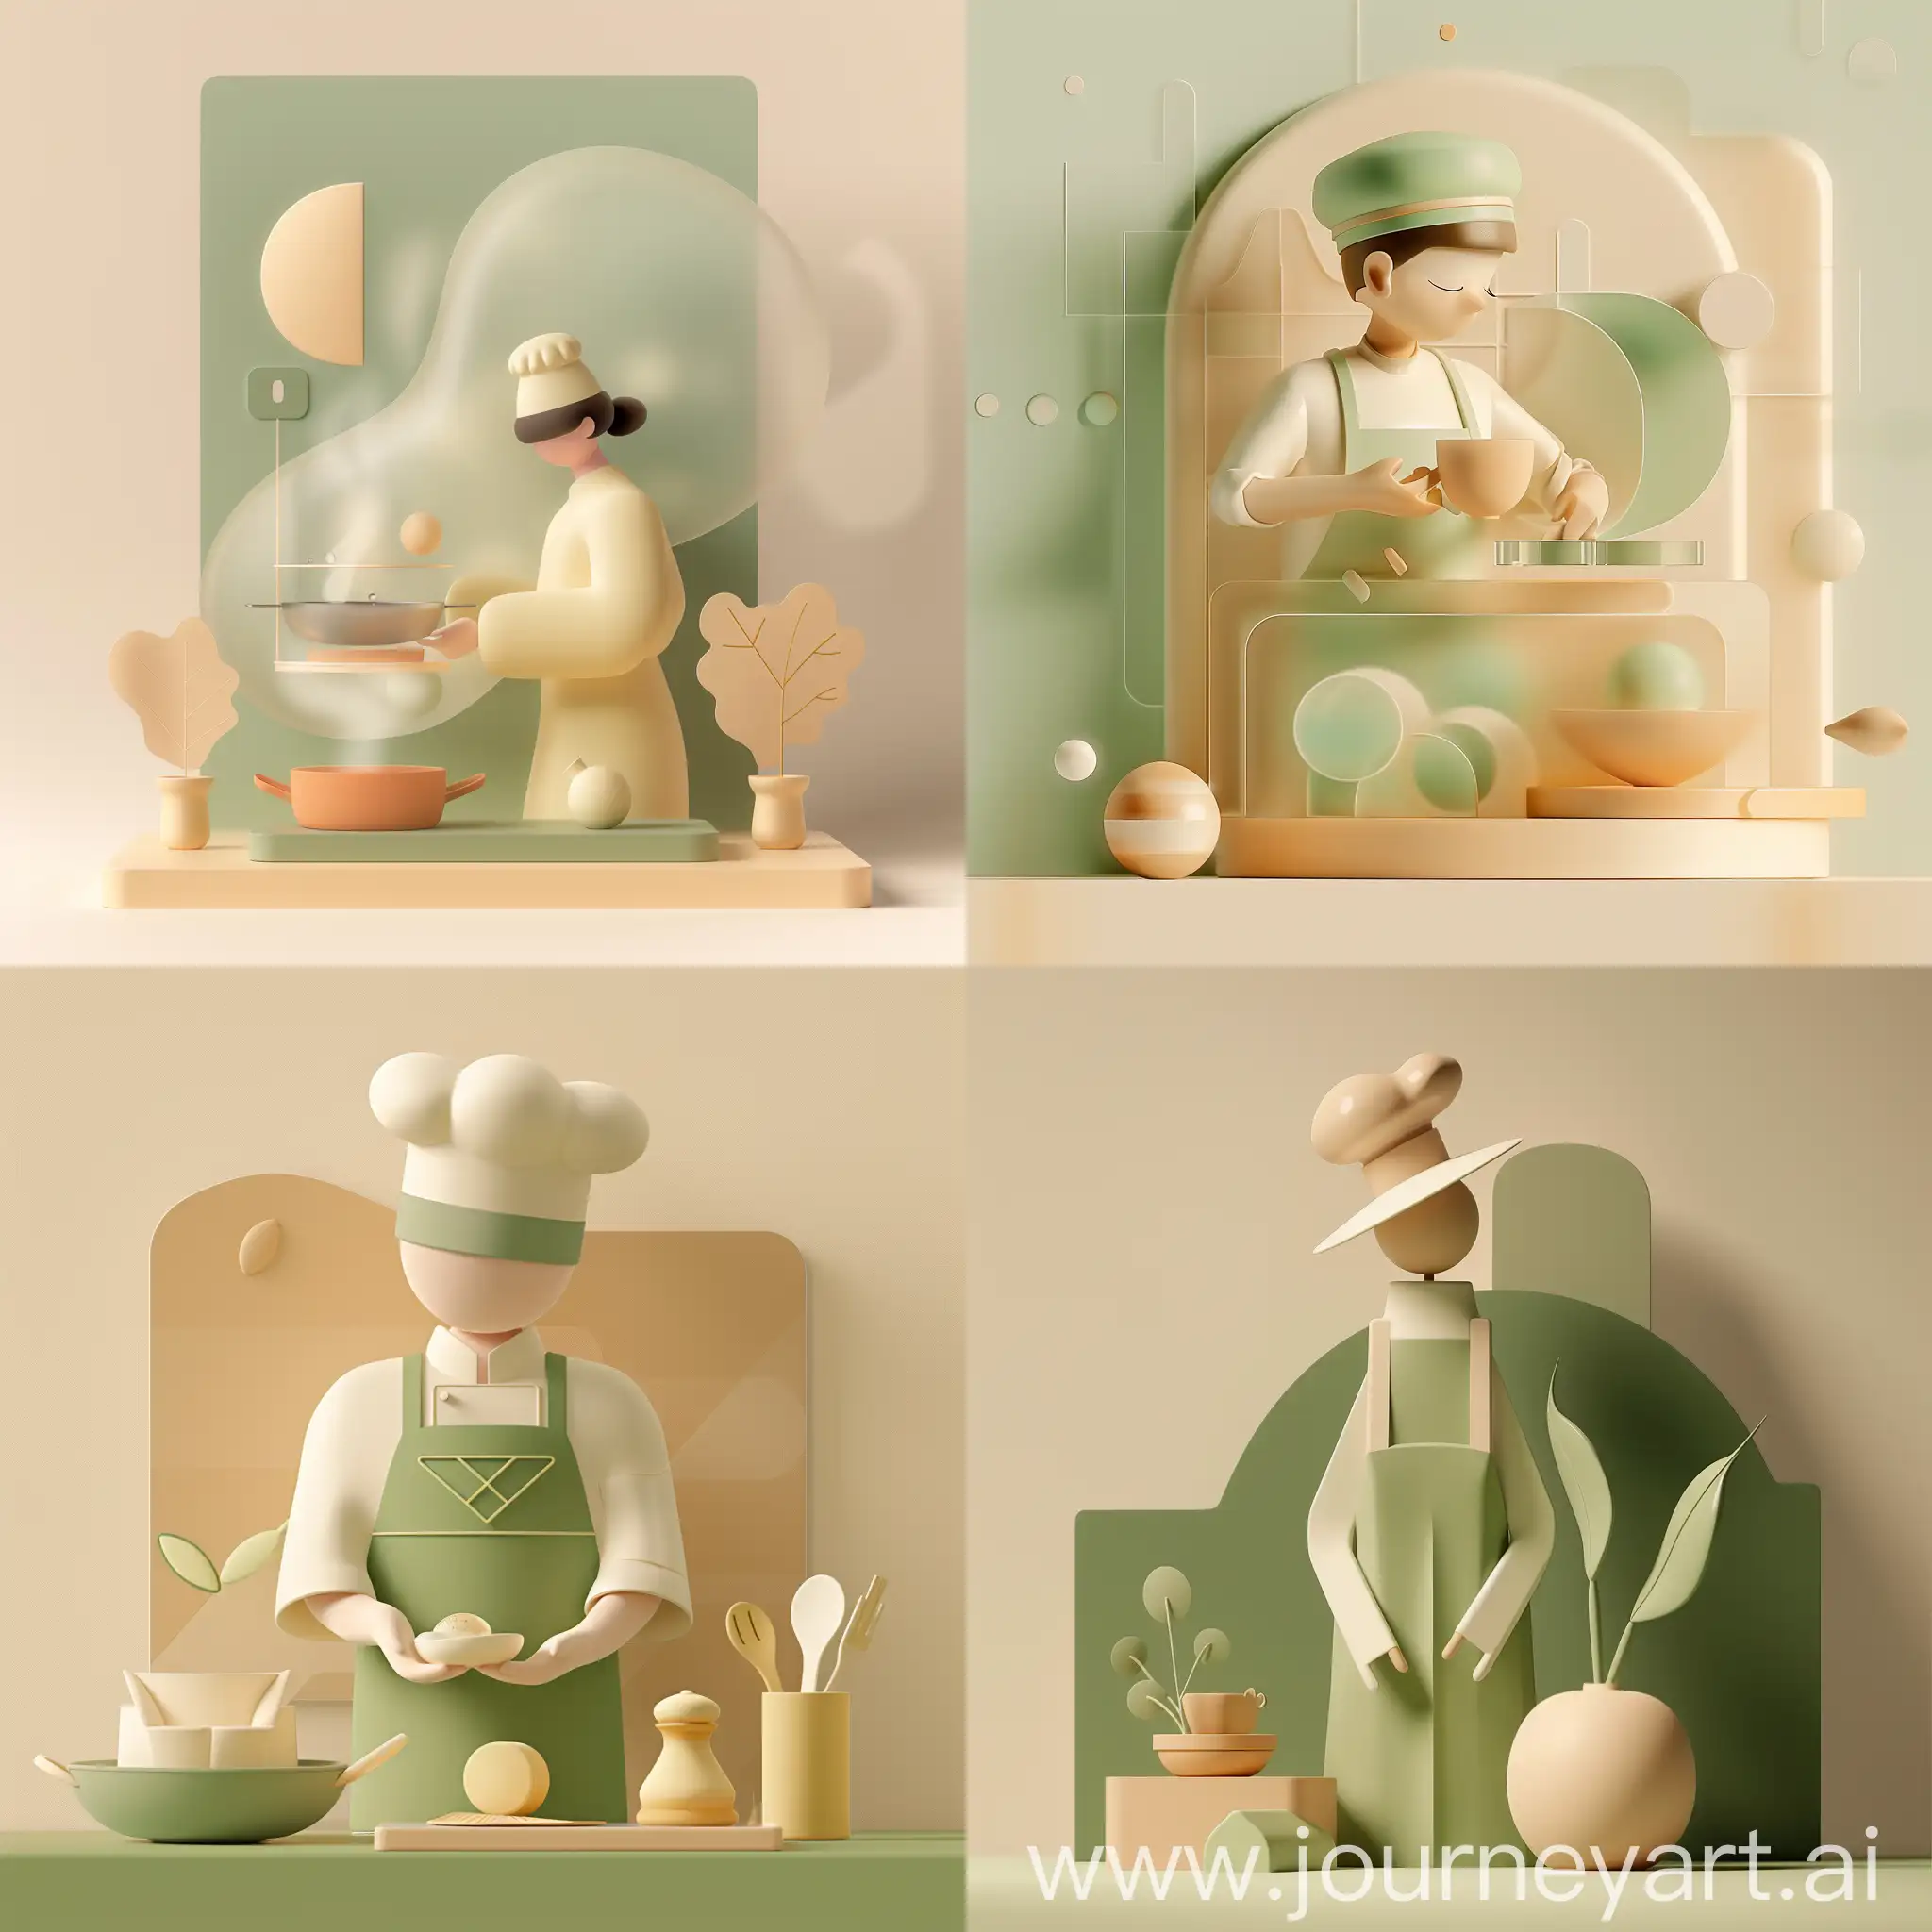 Minimalist-3D-Cooking-Student-Illustration-with-Soft-Lines-and-Gradient-Colors